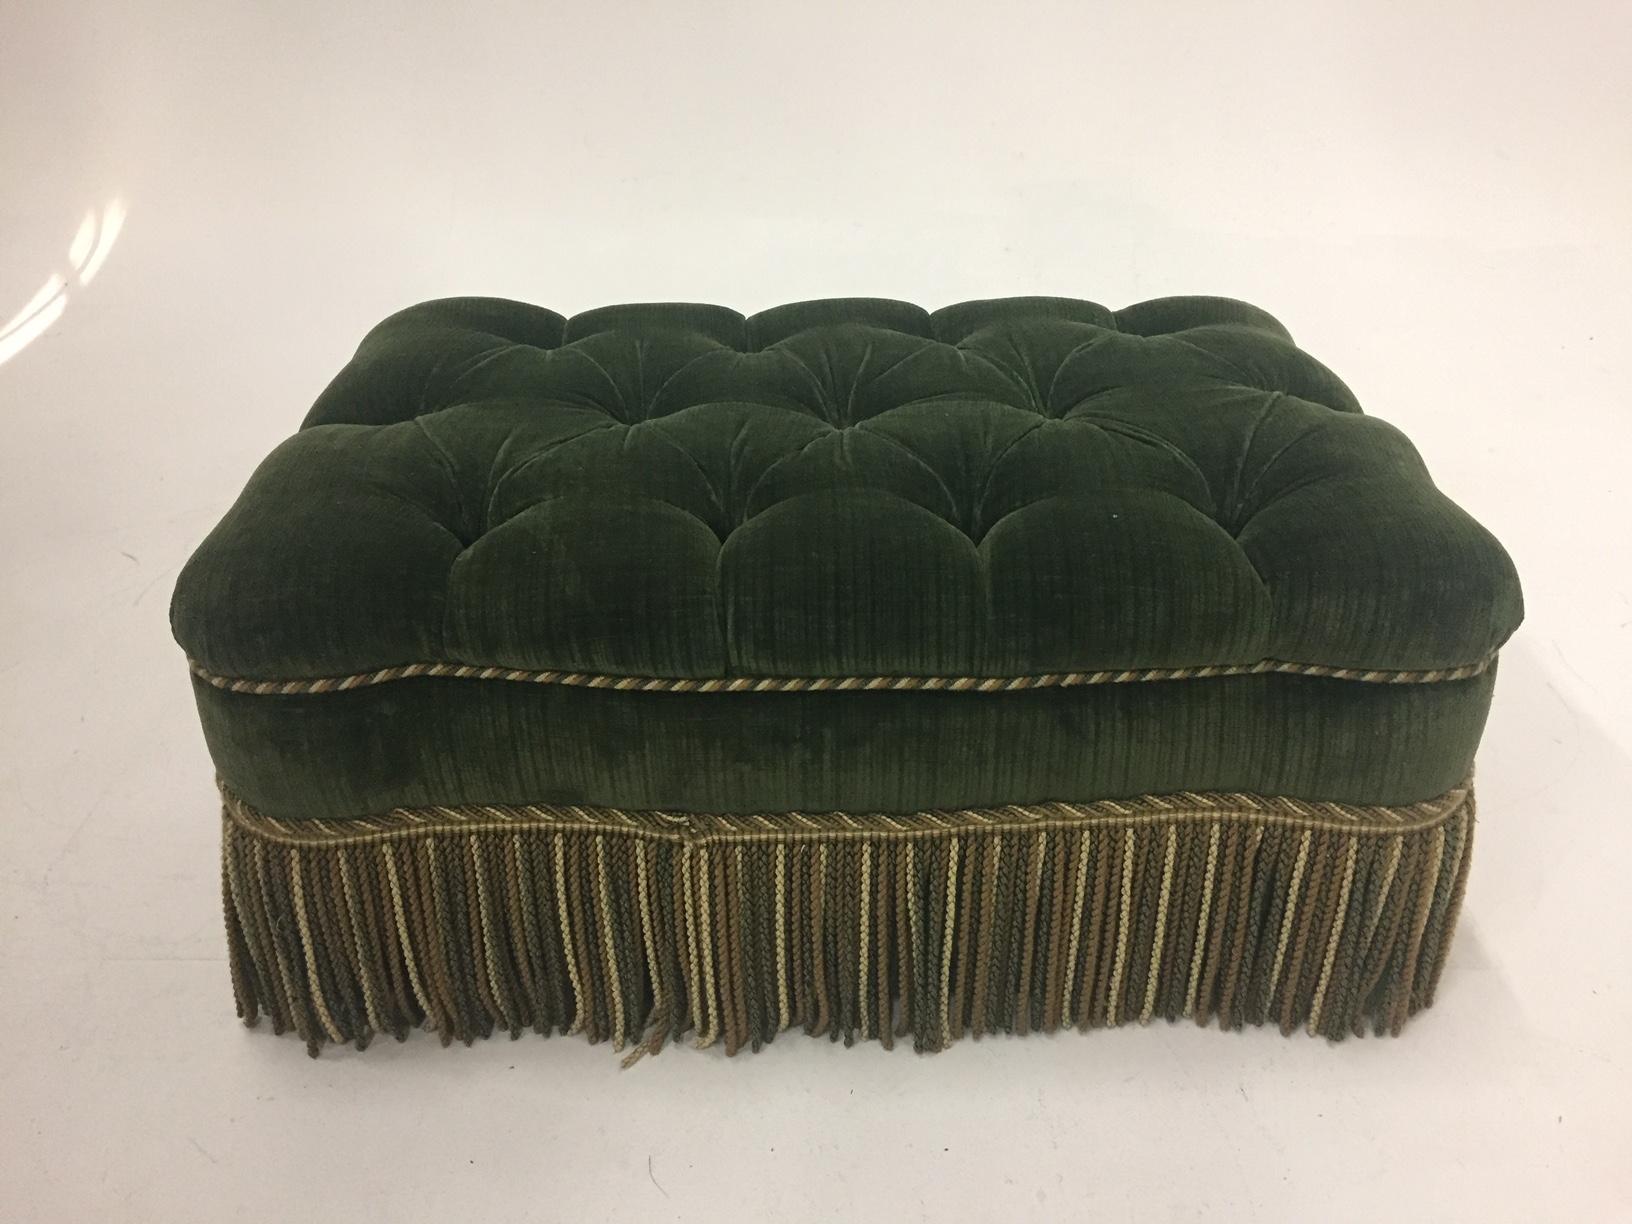 American Luxurious Rectangular Green Tufted Mohair Ottoman with Fringe